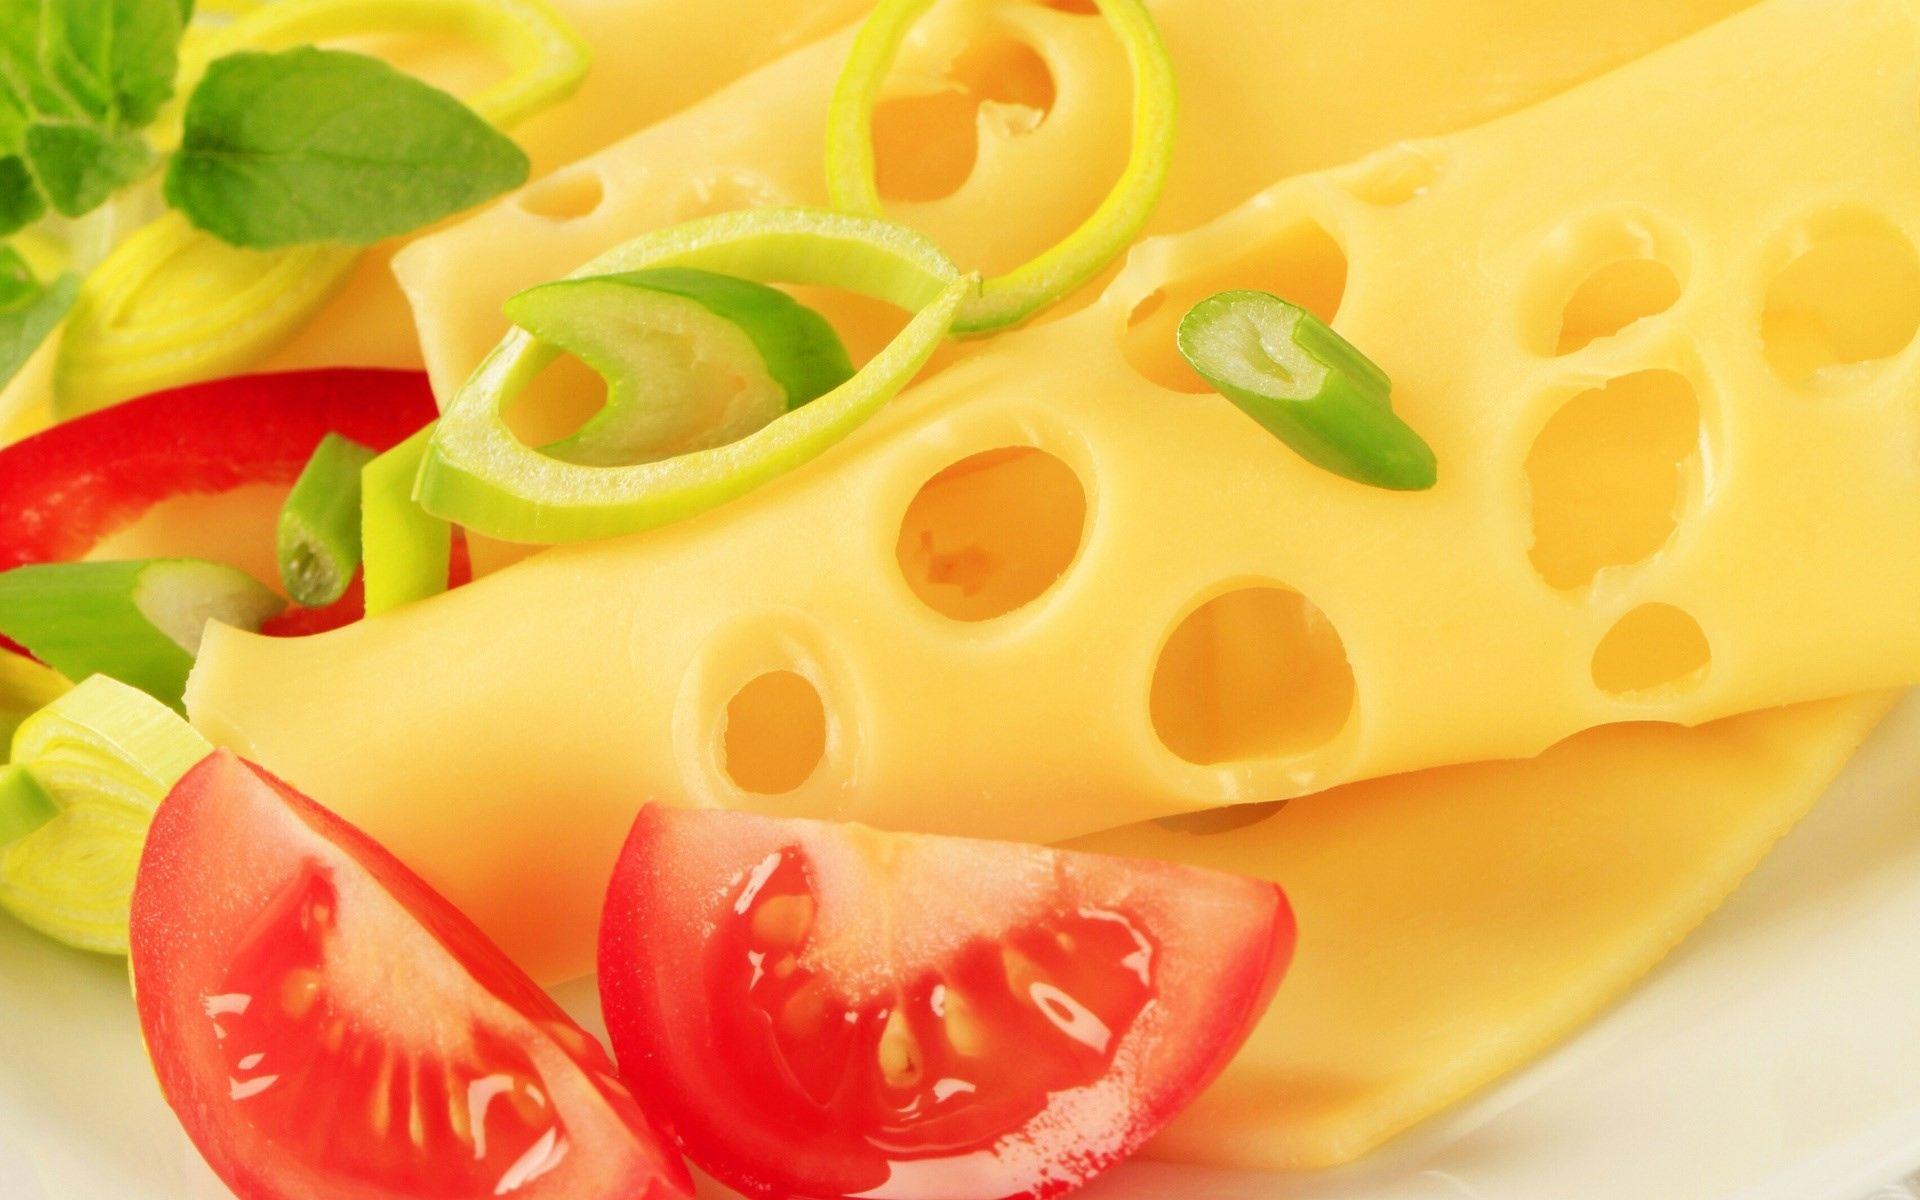 Tomatoes with cheese wallpaper and image, picture